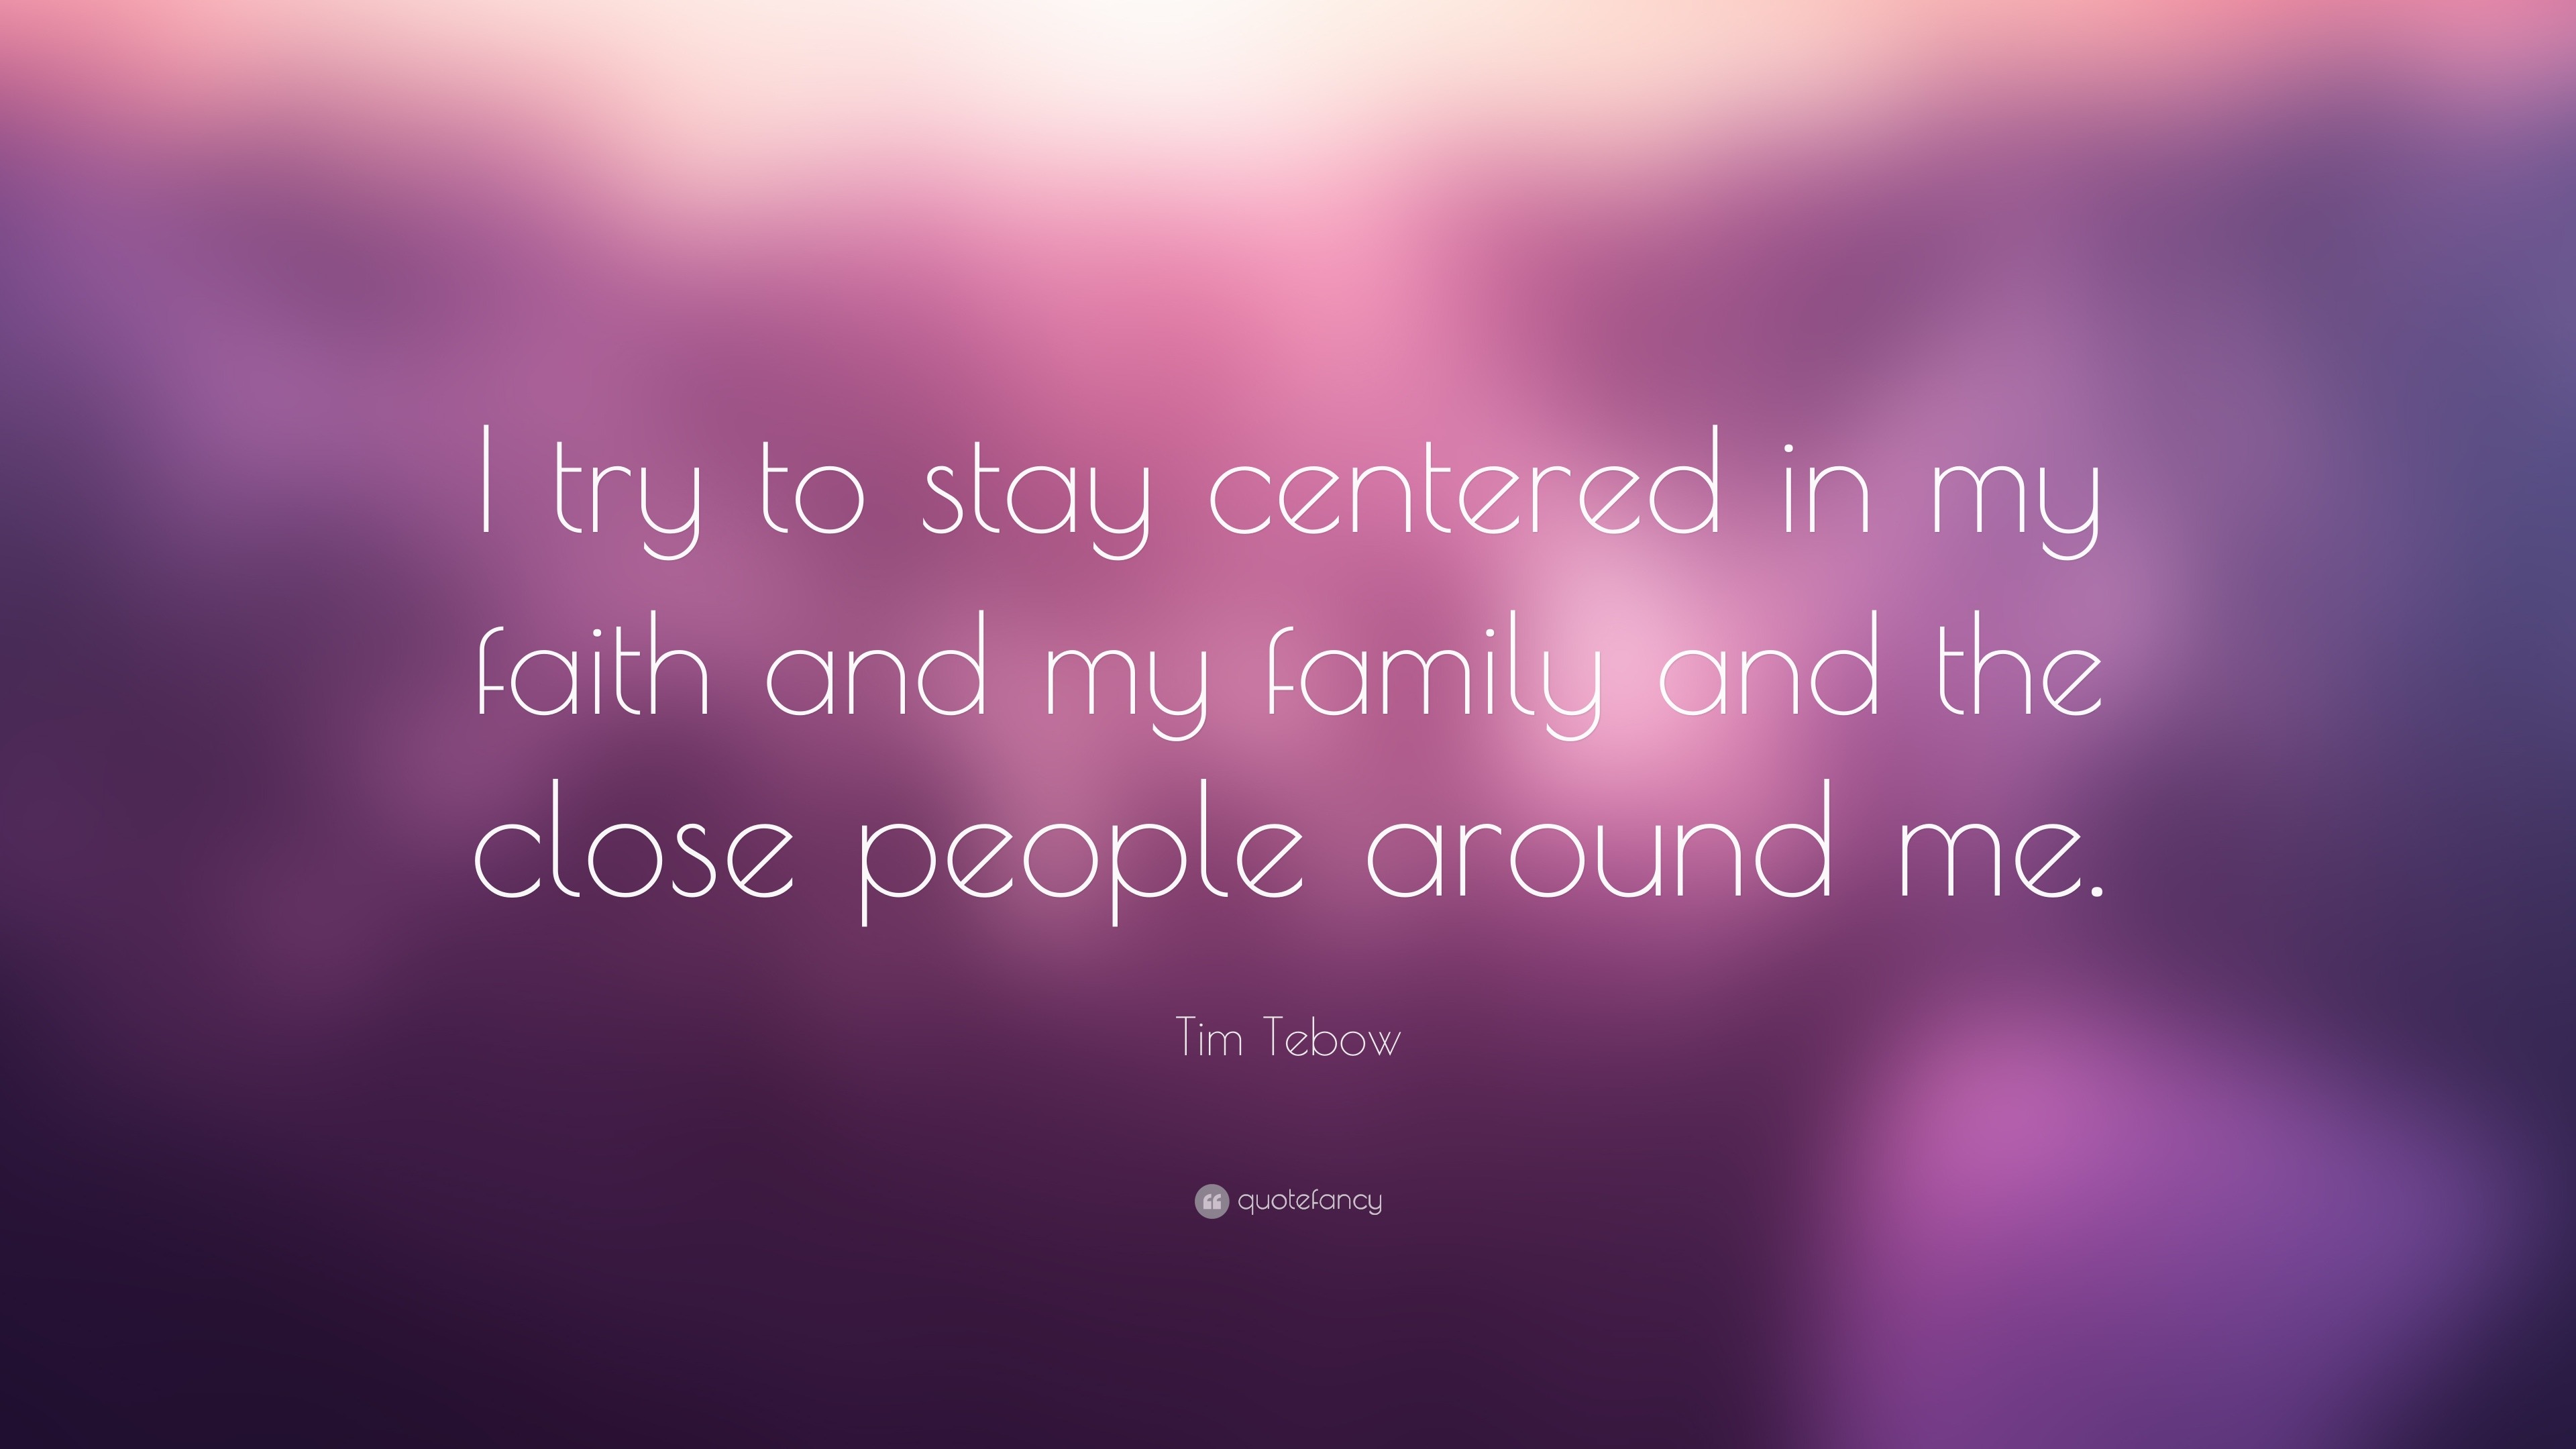 Tim Tebow Quote: “I try to stay centered in my faith and my family and the